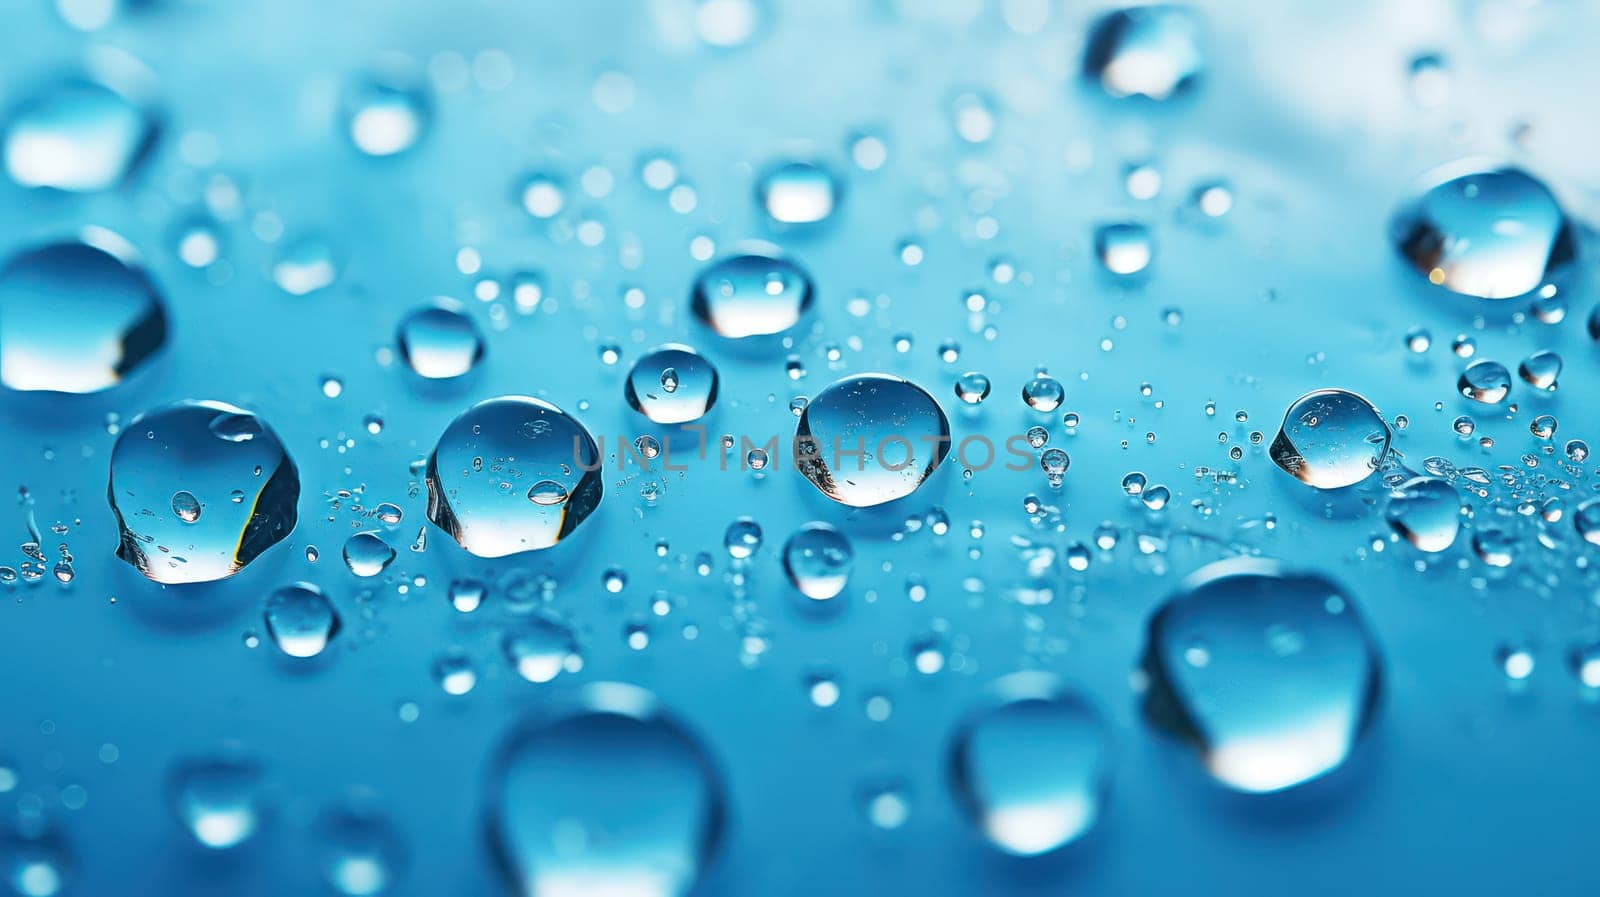 Dancing Raindrops on a Clear, Blue Surface: A Refreshing and Calm Water Symphony by Vichizh